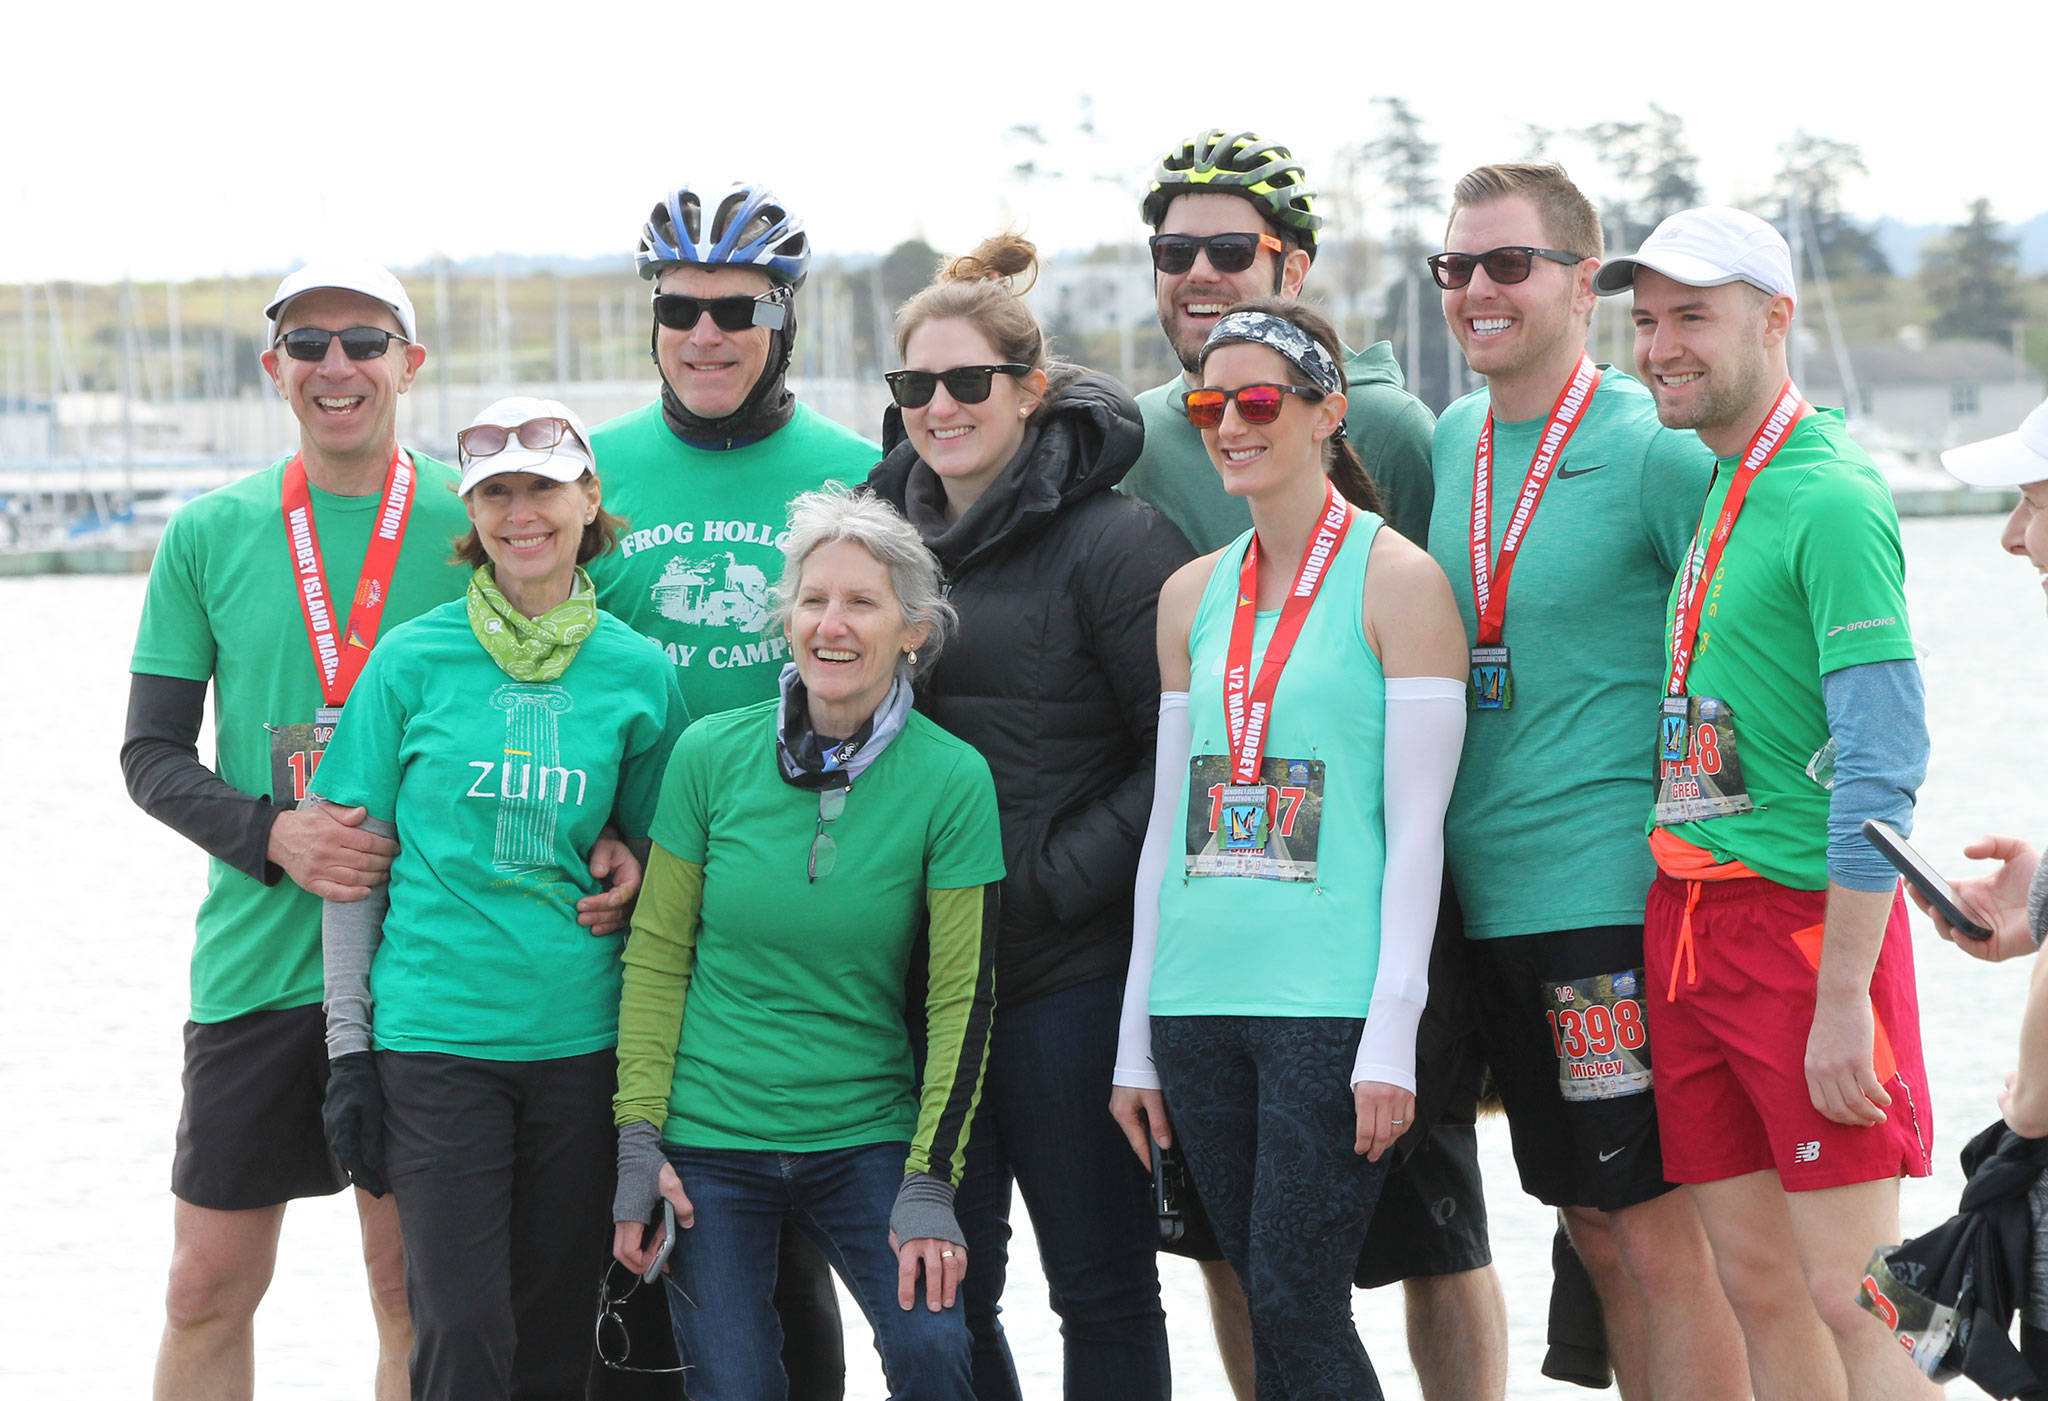 The gang’s all here for the Whidbey Island Marathon. (Photo by Jim Waller/Whidbey News-Times)